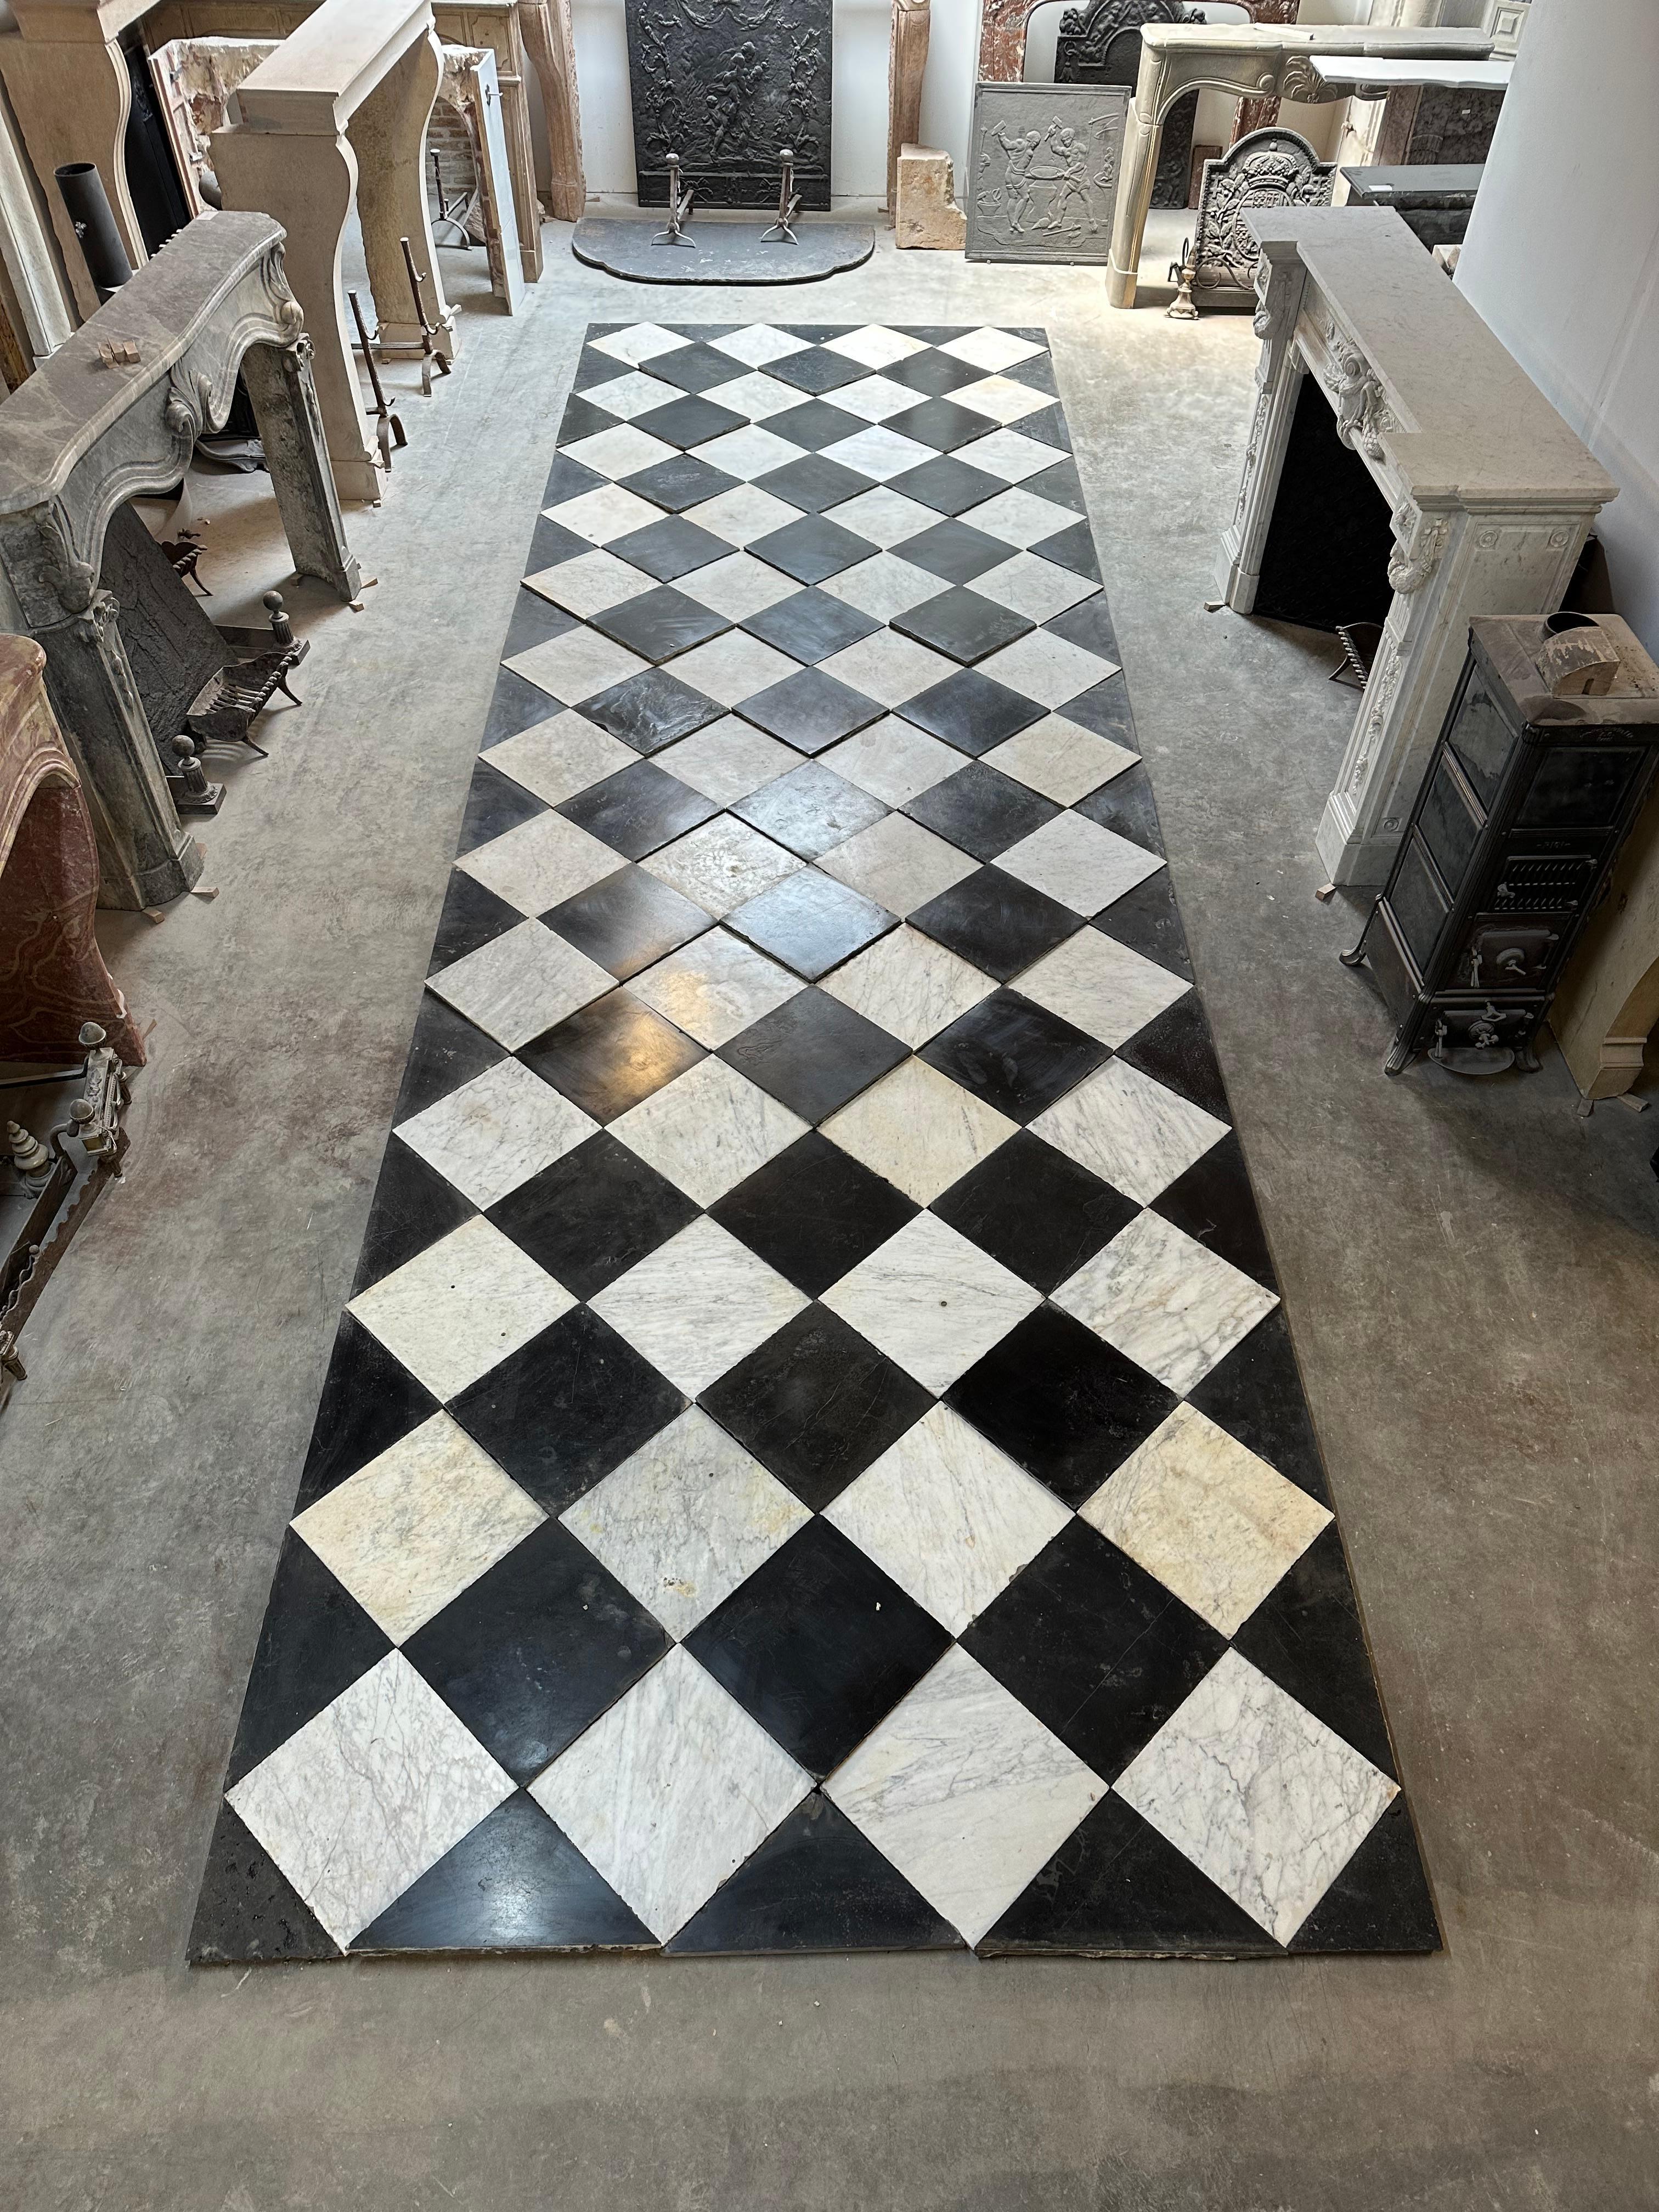 Very pleased to offer this beautiful Dutch checkered marble floor.
This used to be the hallway a small castle near the border with Belgium, the floor dates back to approx. 1835.

The deep dark black Belgian stone come from the area of Namen (Namur)